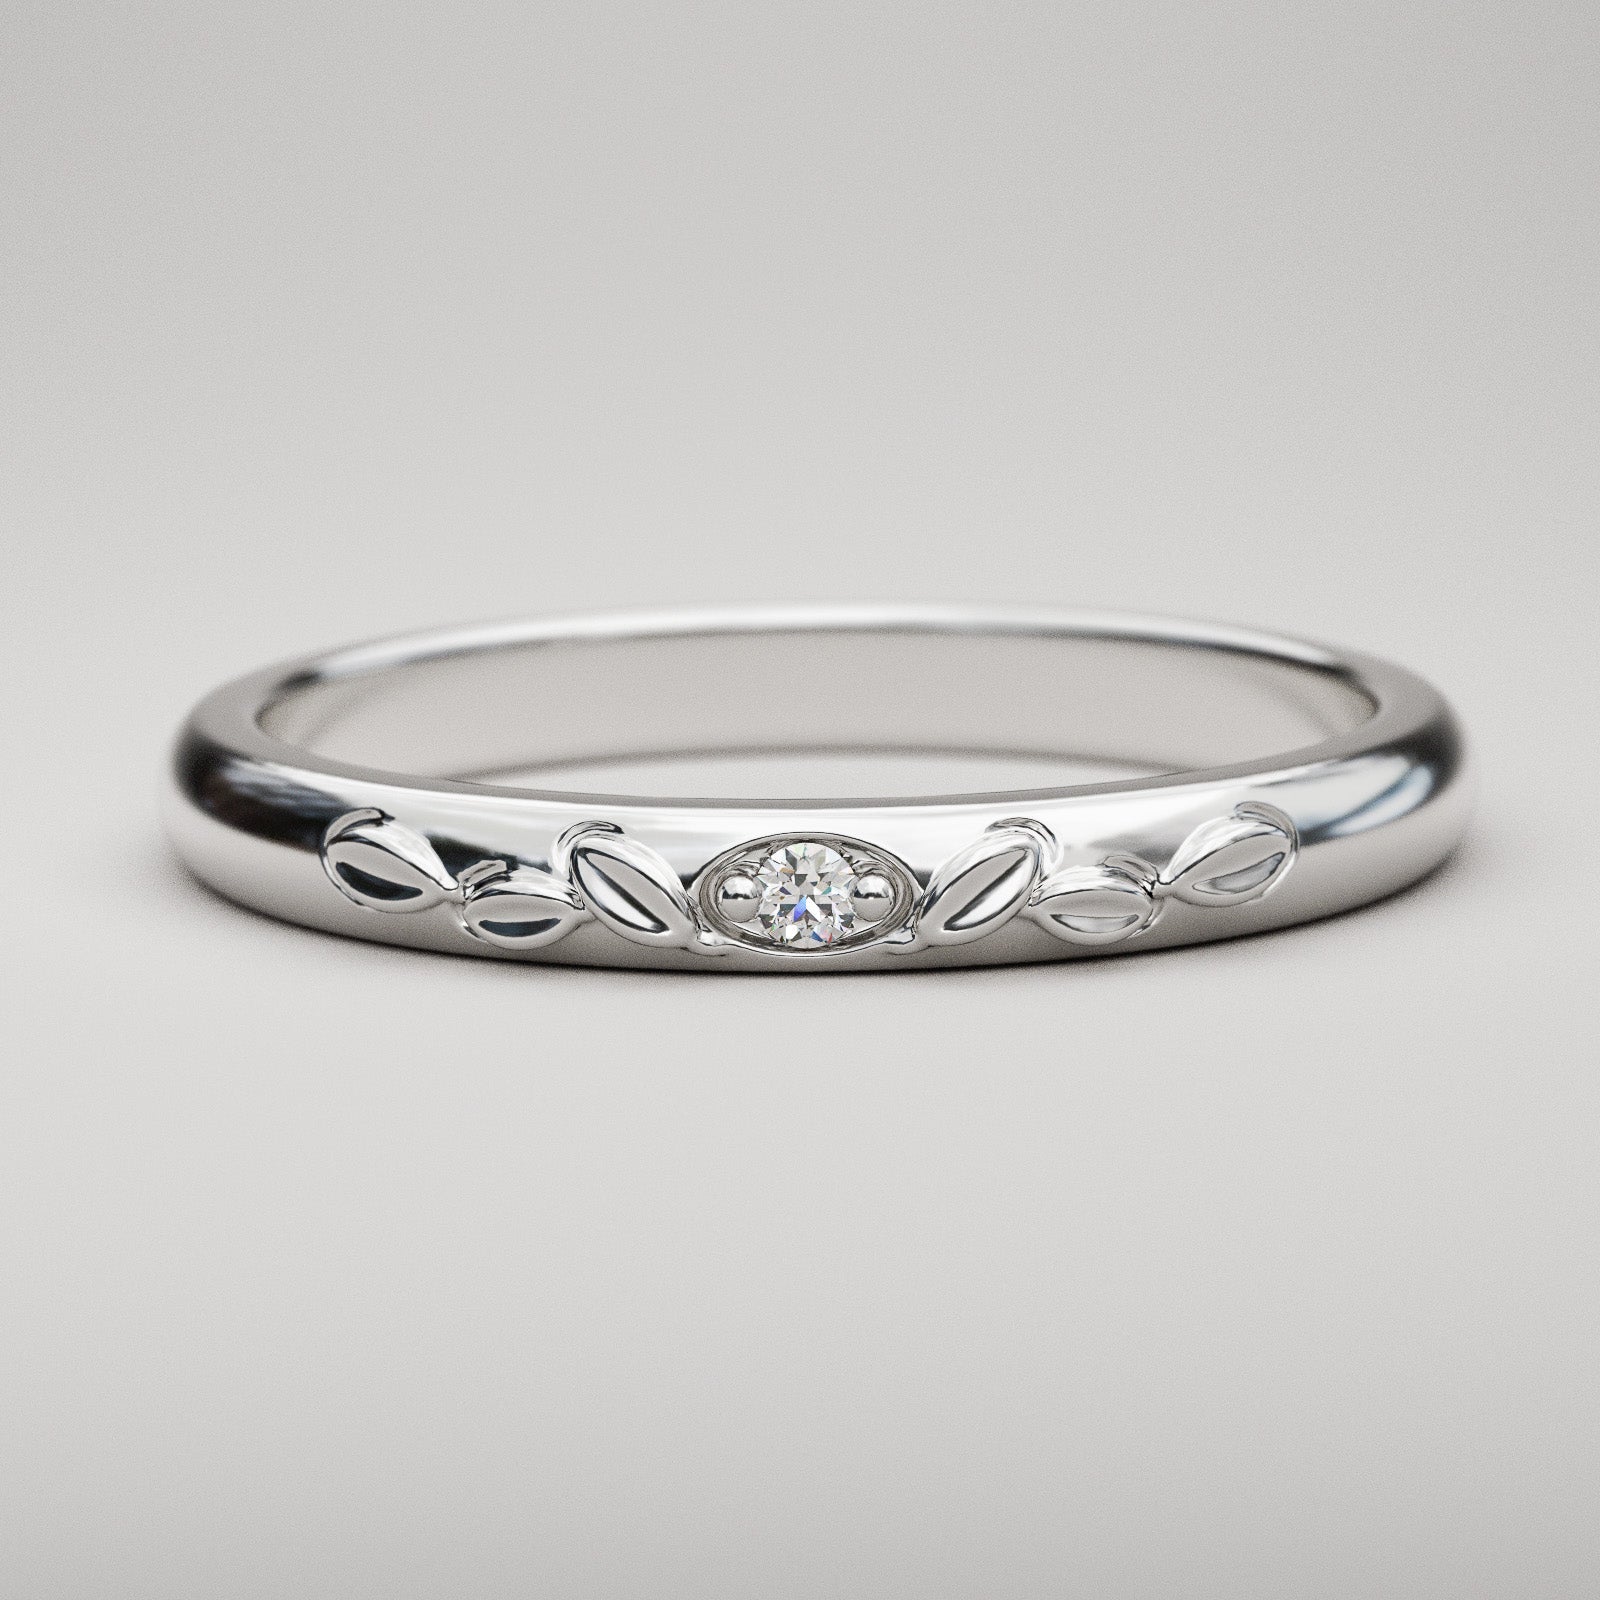 Classic domed white gold band with genuine diamond and leaf details